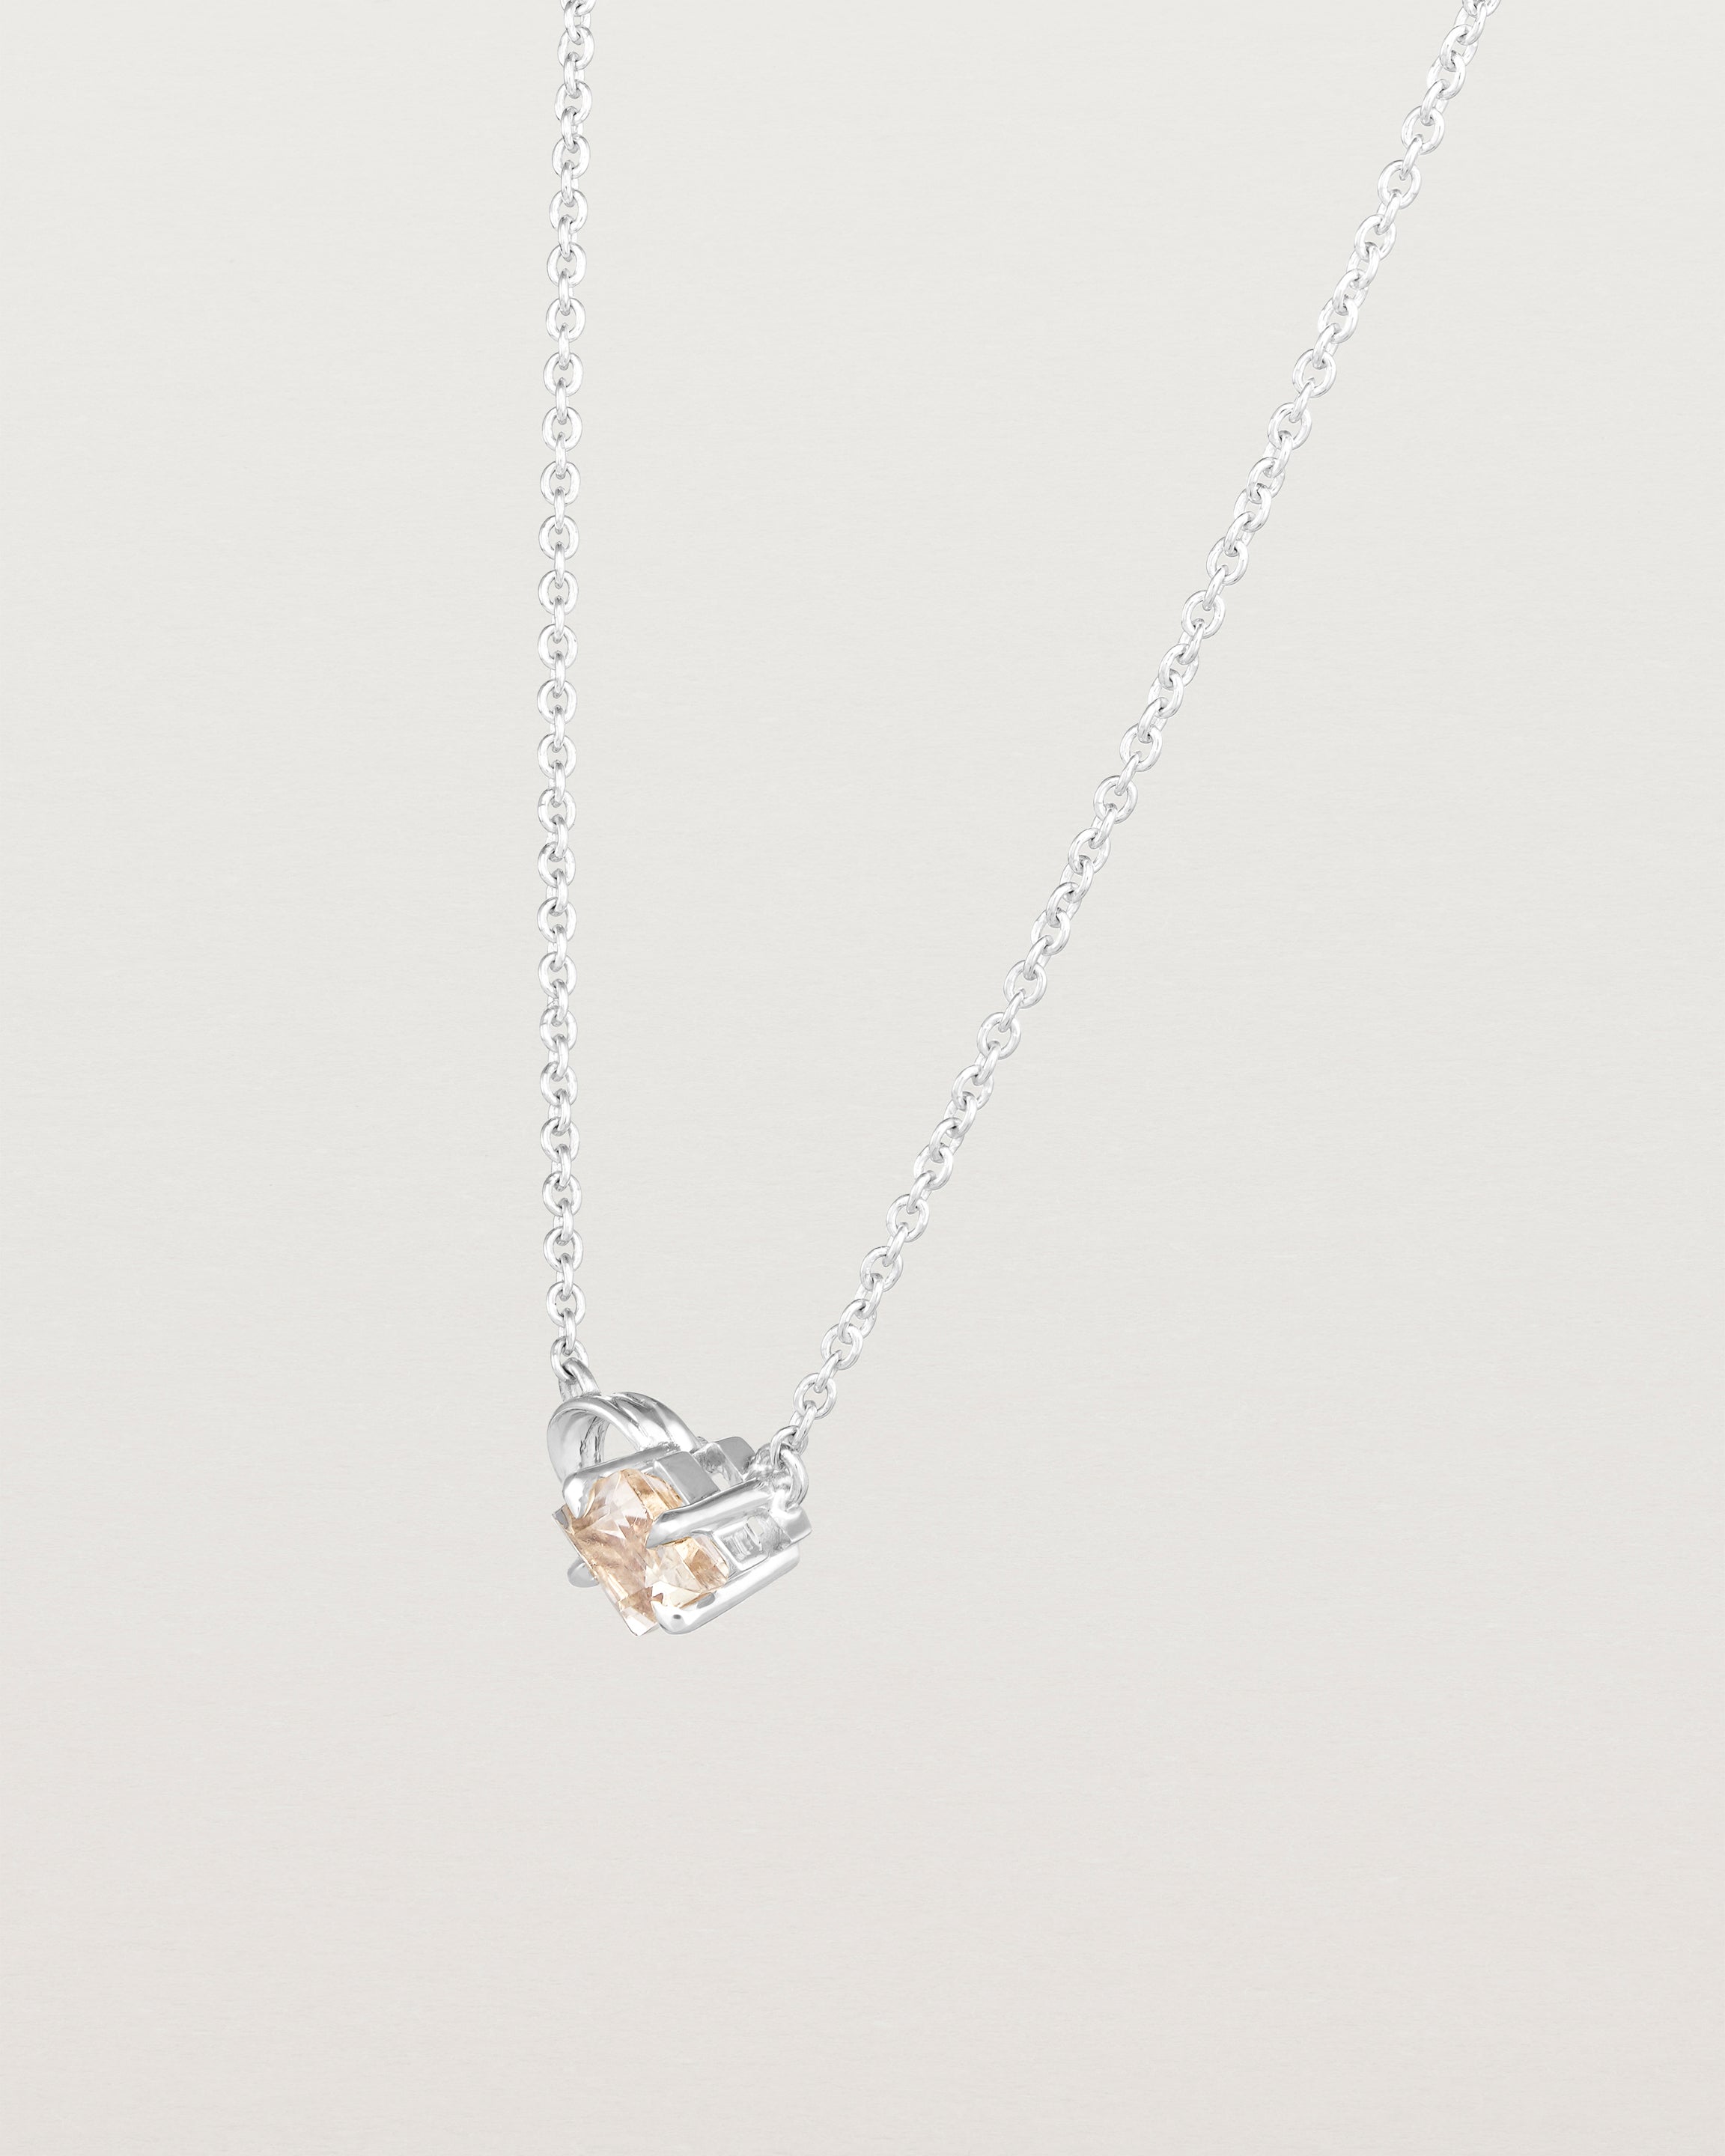 Angled view of the Nuna Necklace | Savannah Sunstone in sterling silver.